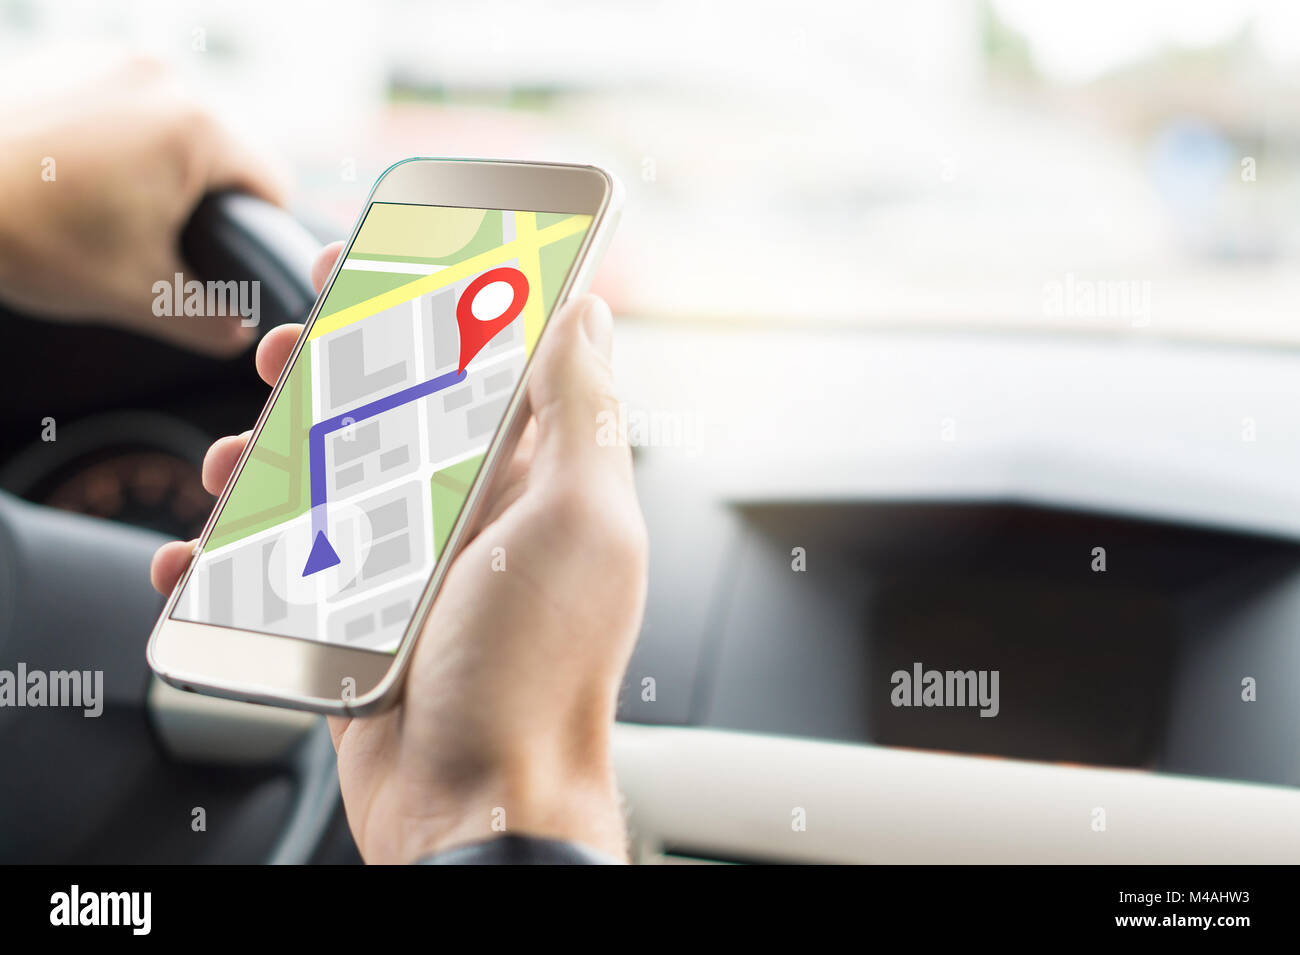 Navigation with mobile app in smartphone. Online map and GPS application on cellphone screen. Inside view in car to hand holding phone in cockpit. Stock Photo